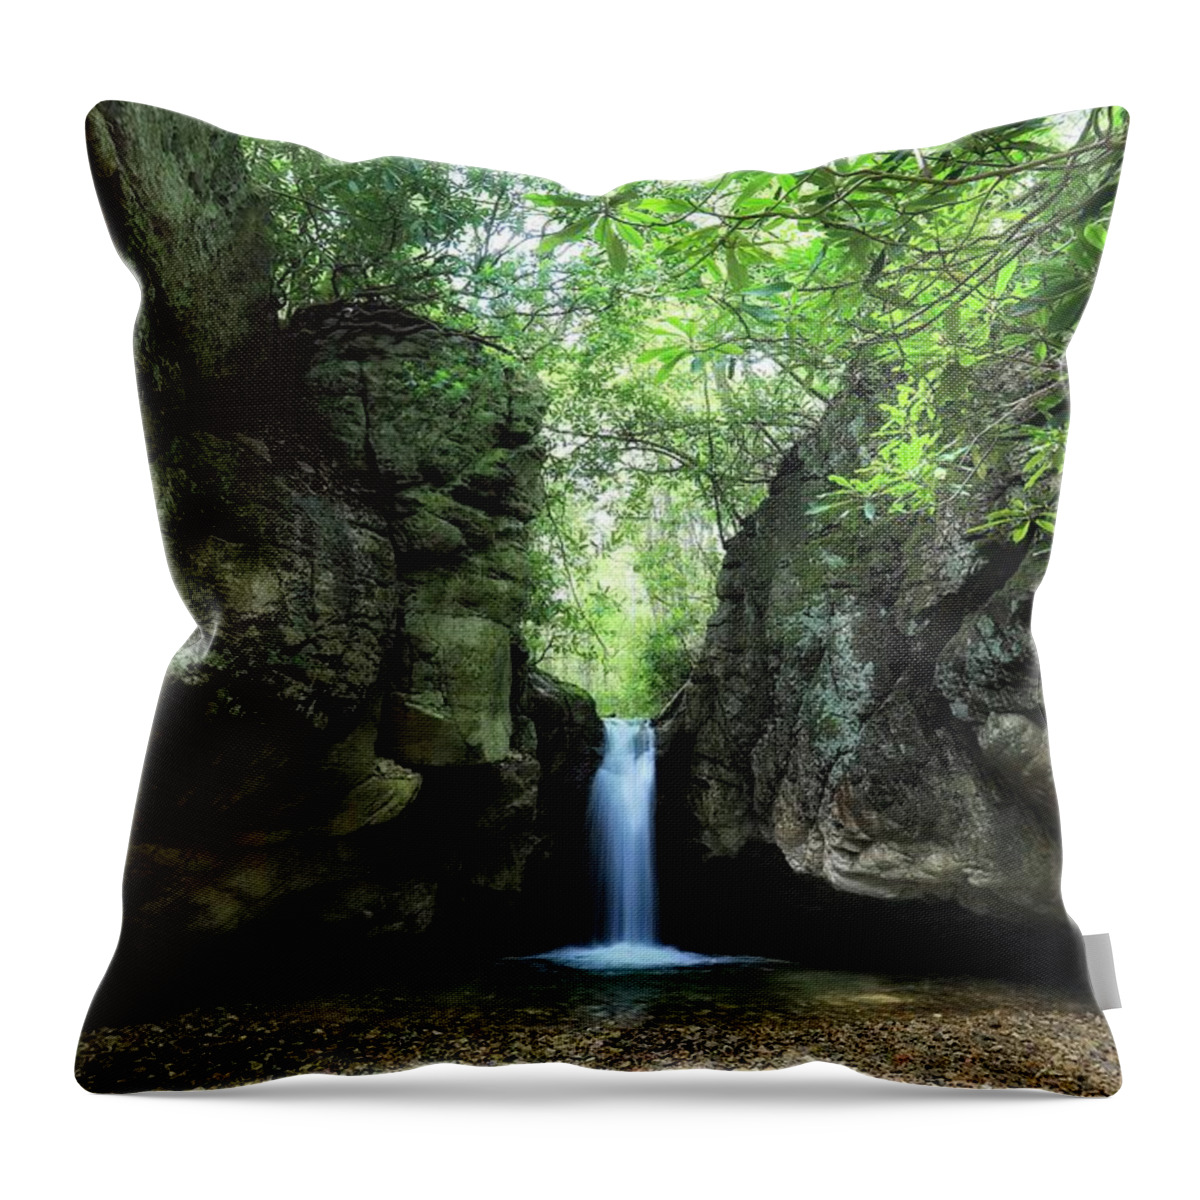 Blue Hole Throw Pillow featuring the photograph The Grotto At The Blue Hole by Chris Berrier